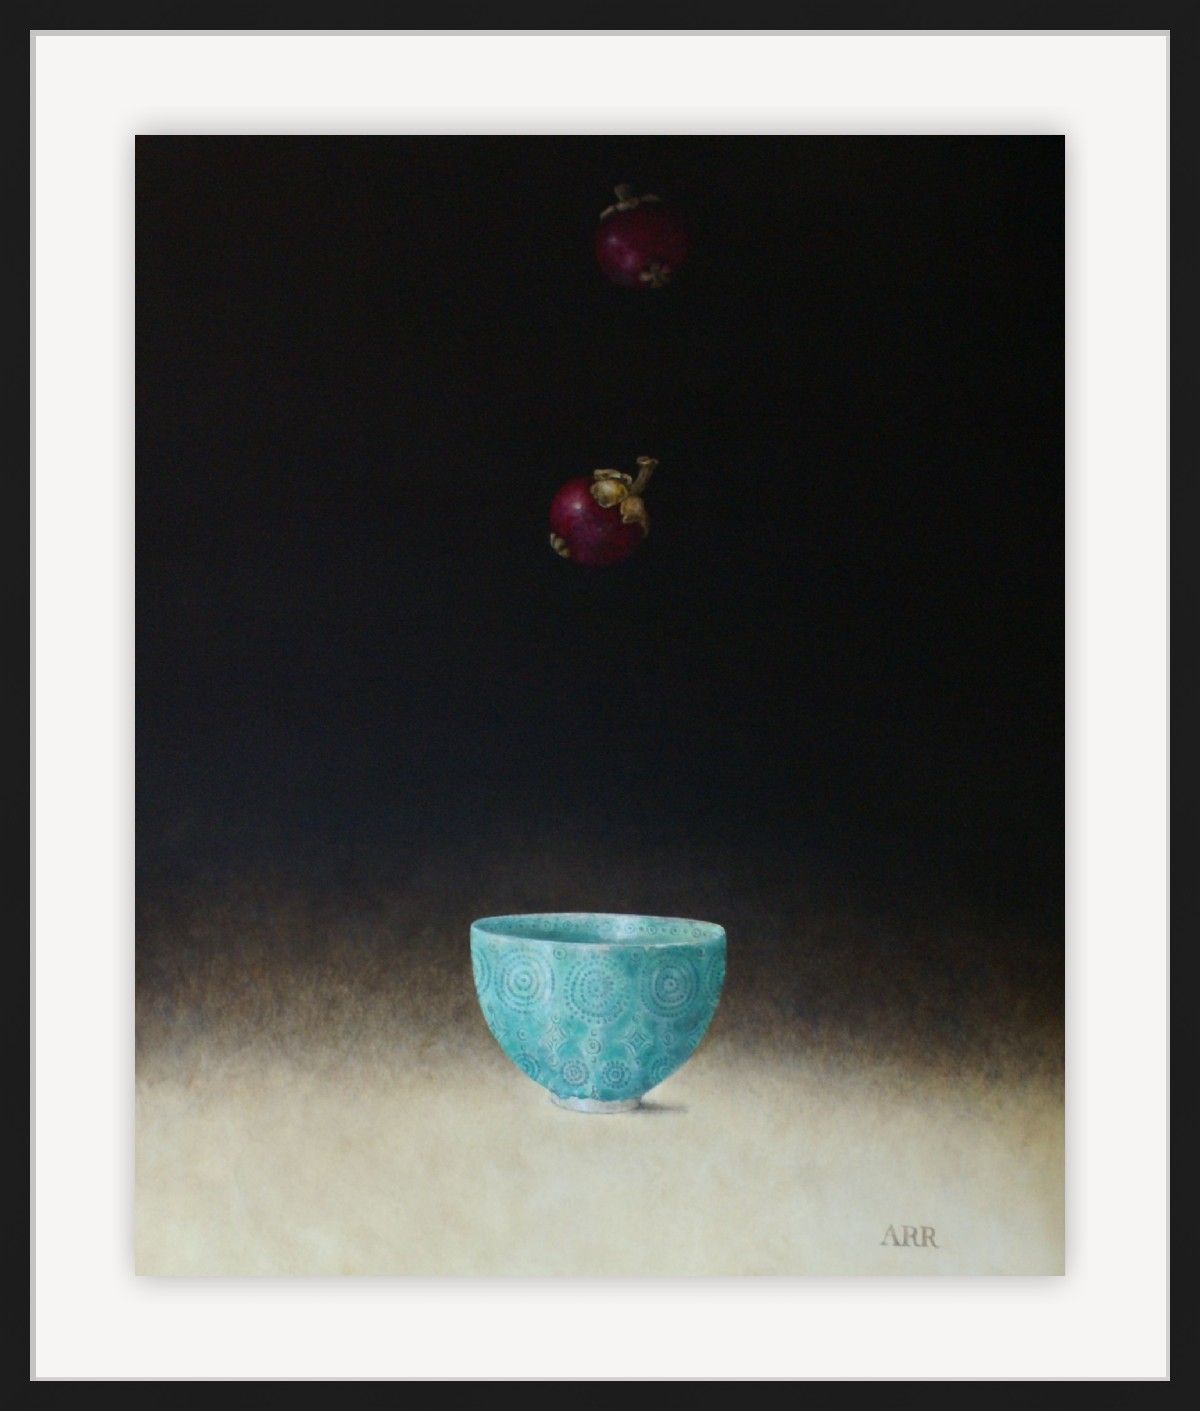 Celadon Bowl with Falling Mangosteens by Alison Rankin